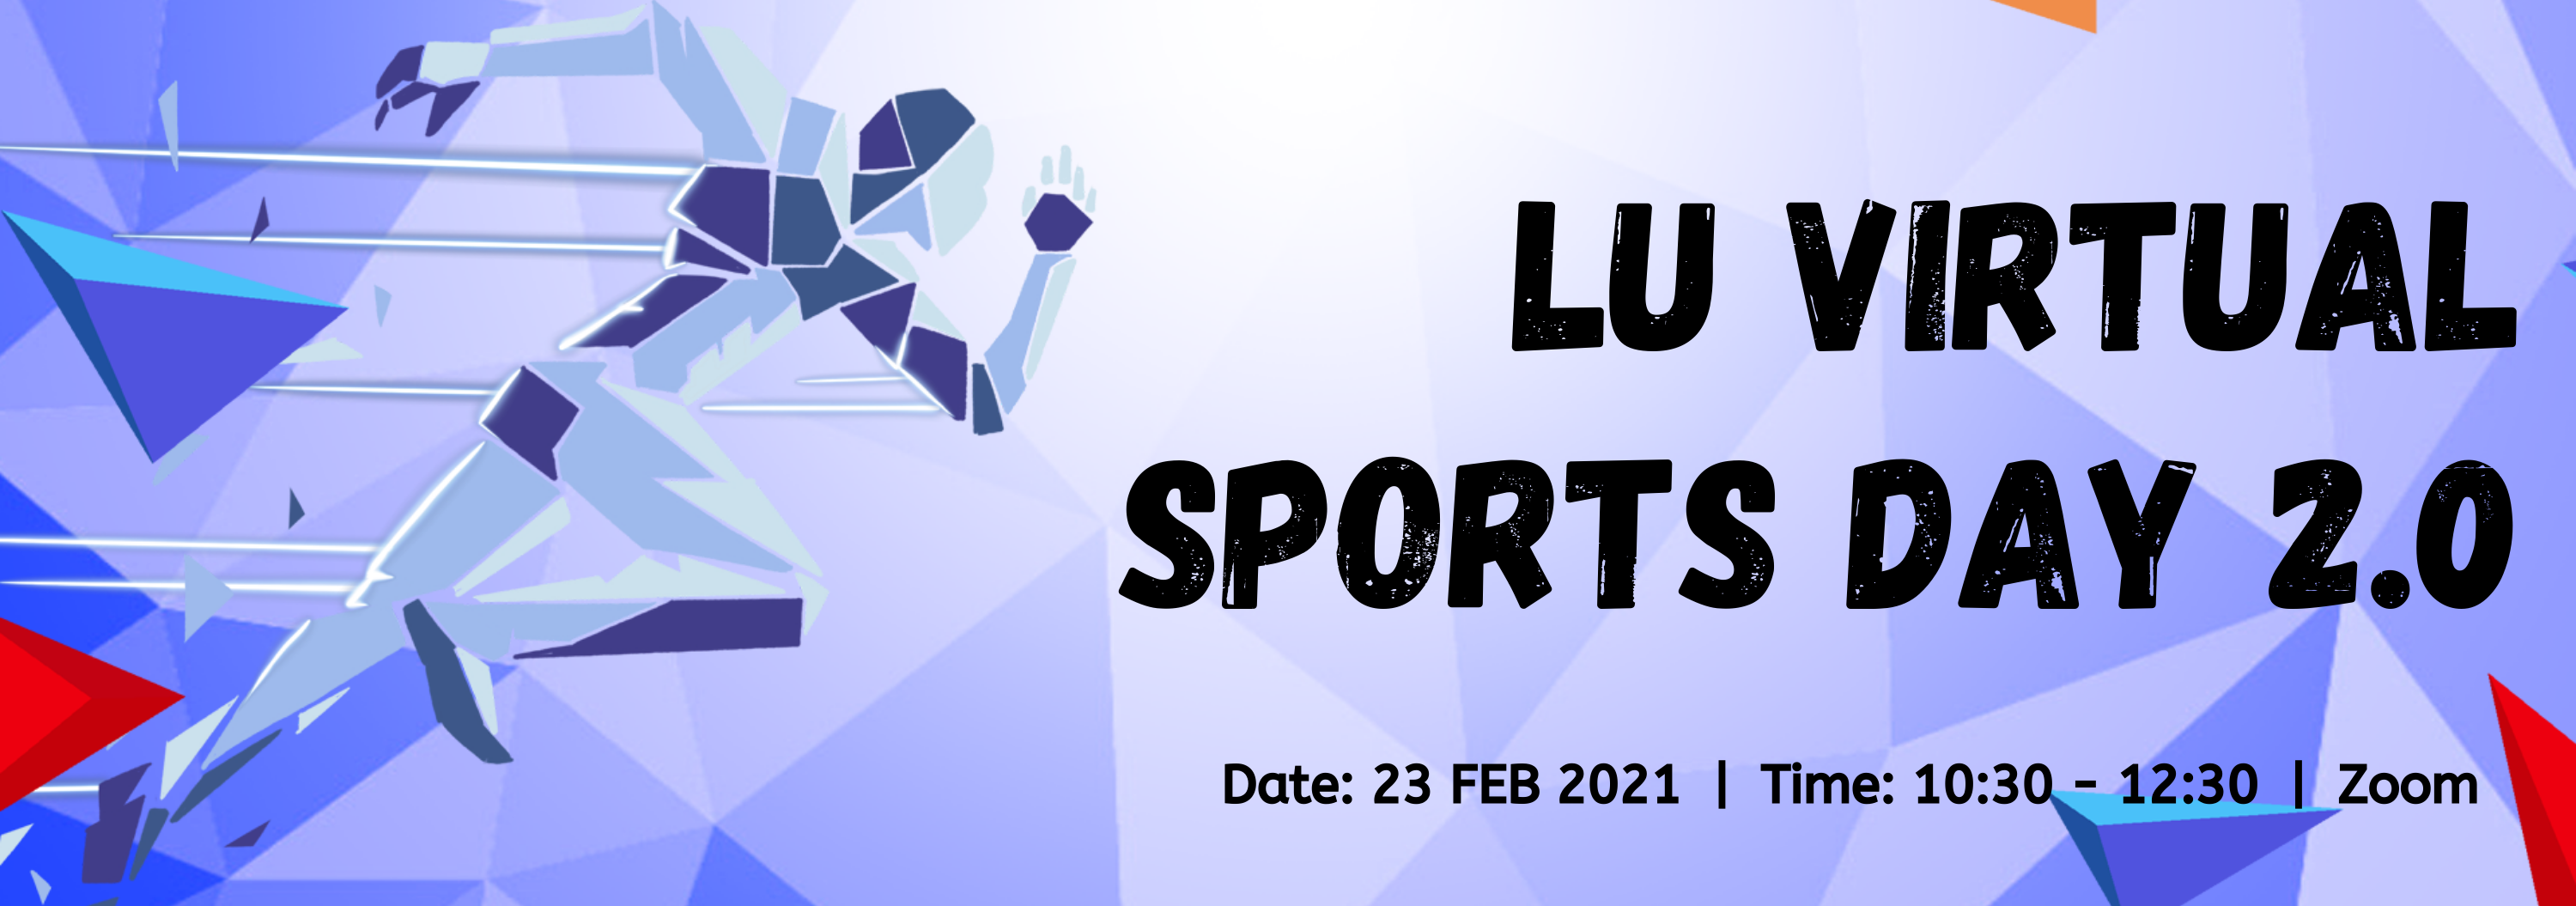 Banner of Virtual Sports Day 2.0